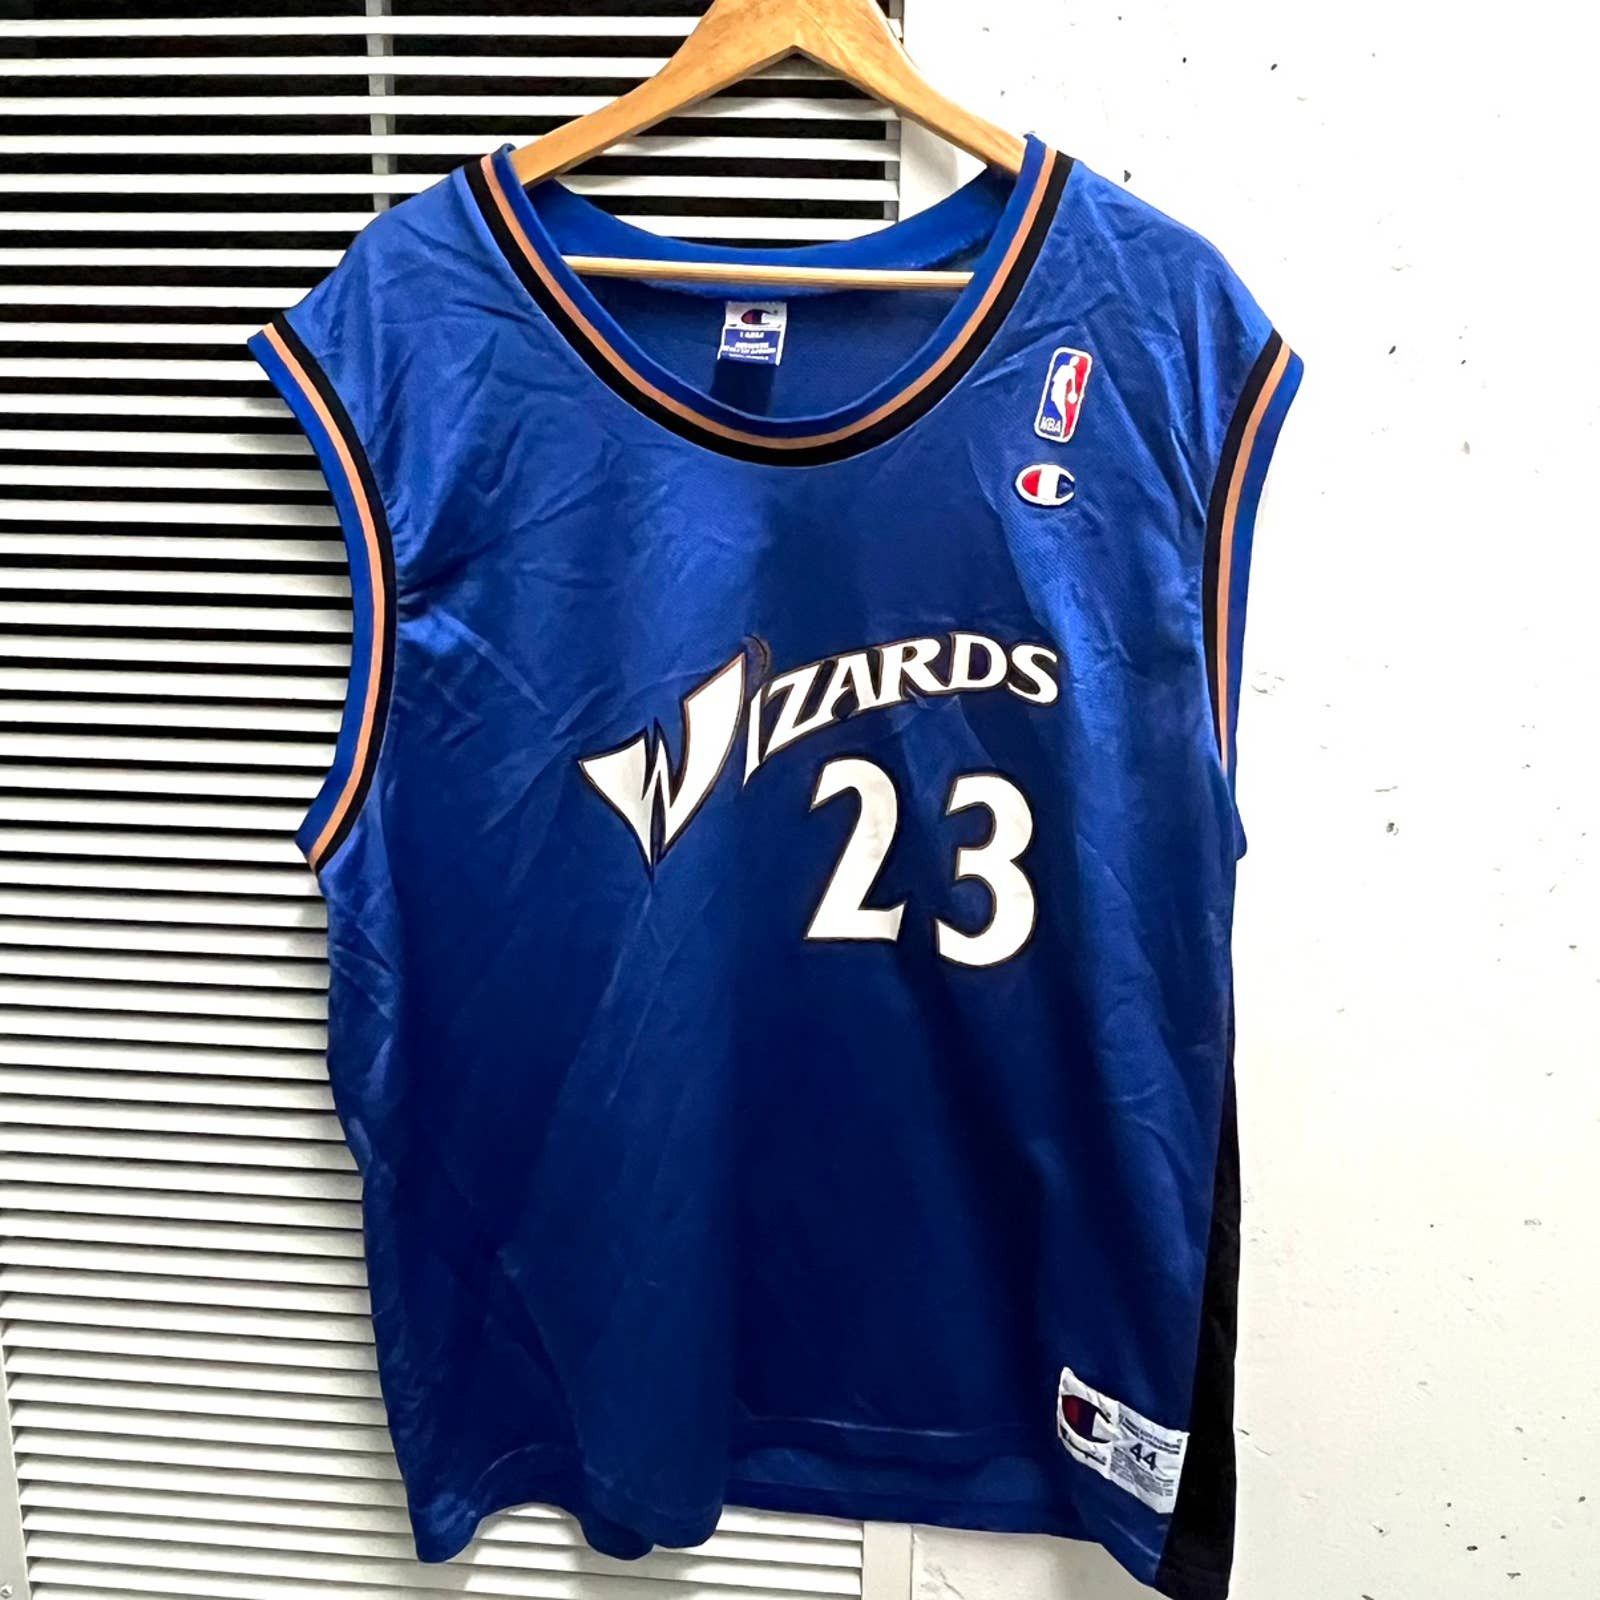 jordan wizards jersey mitchell and ness